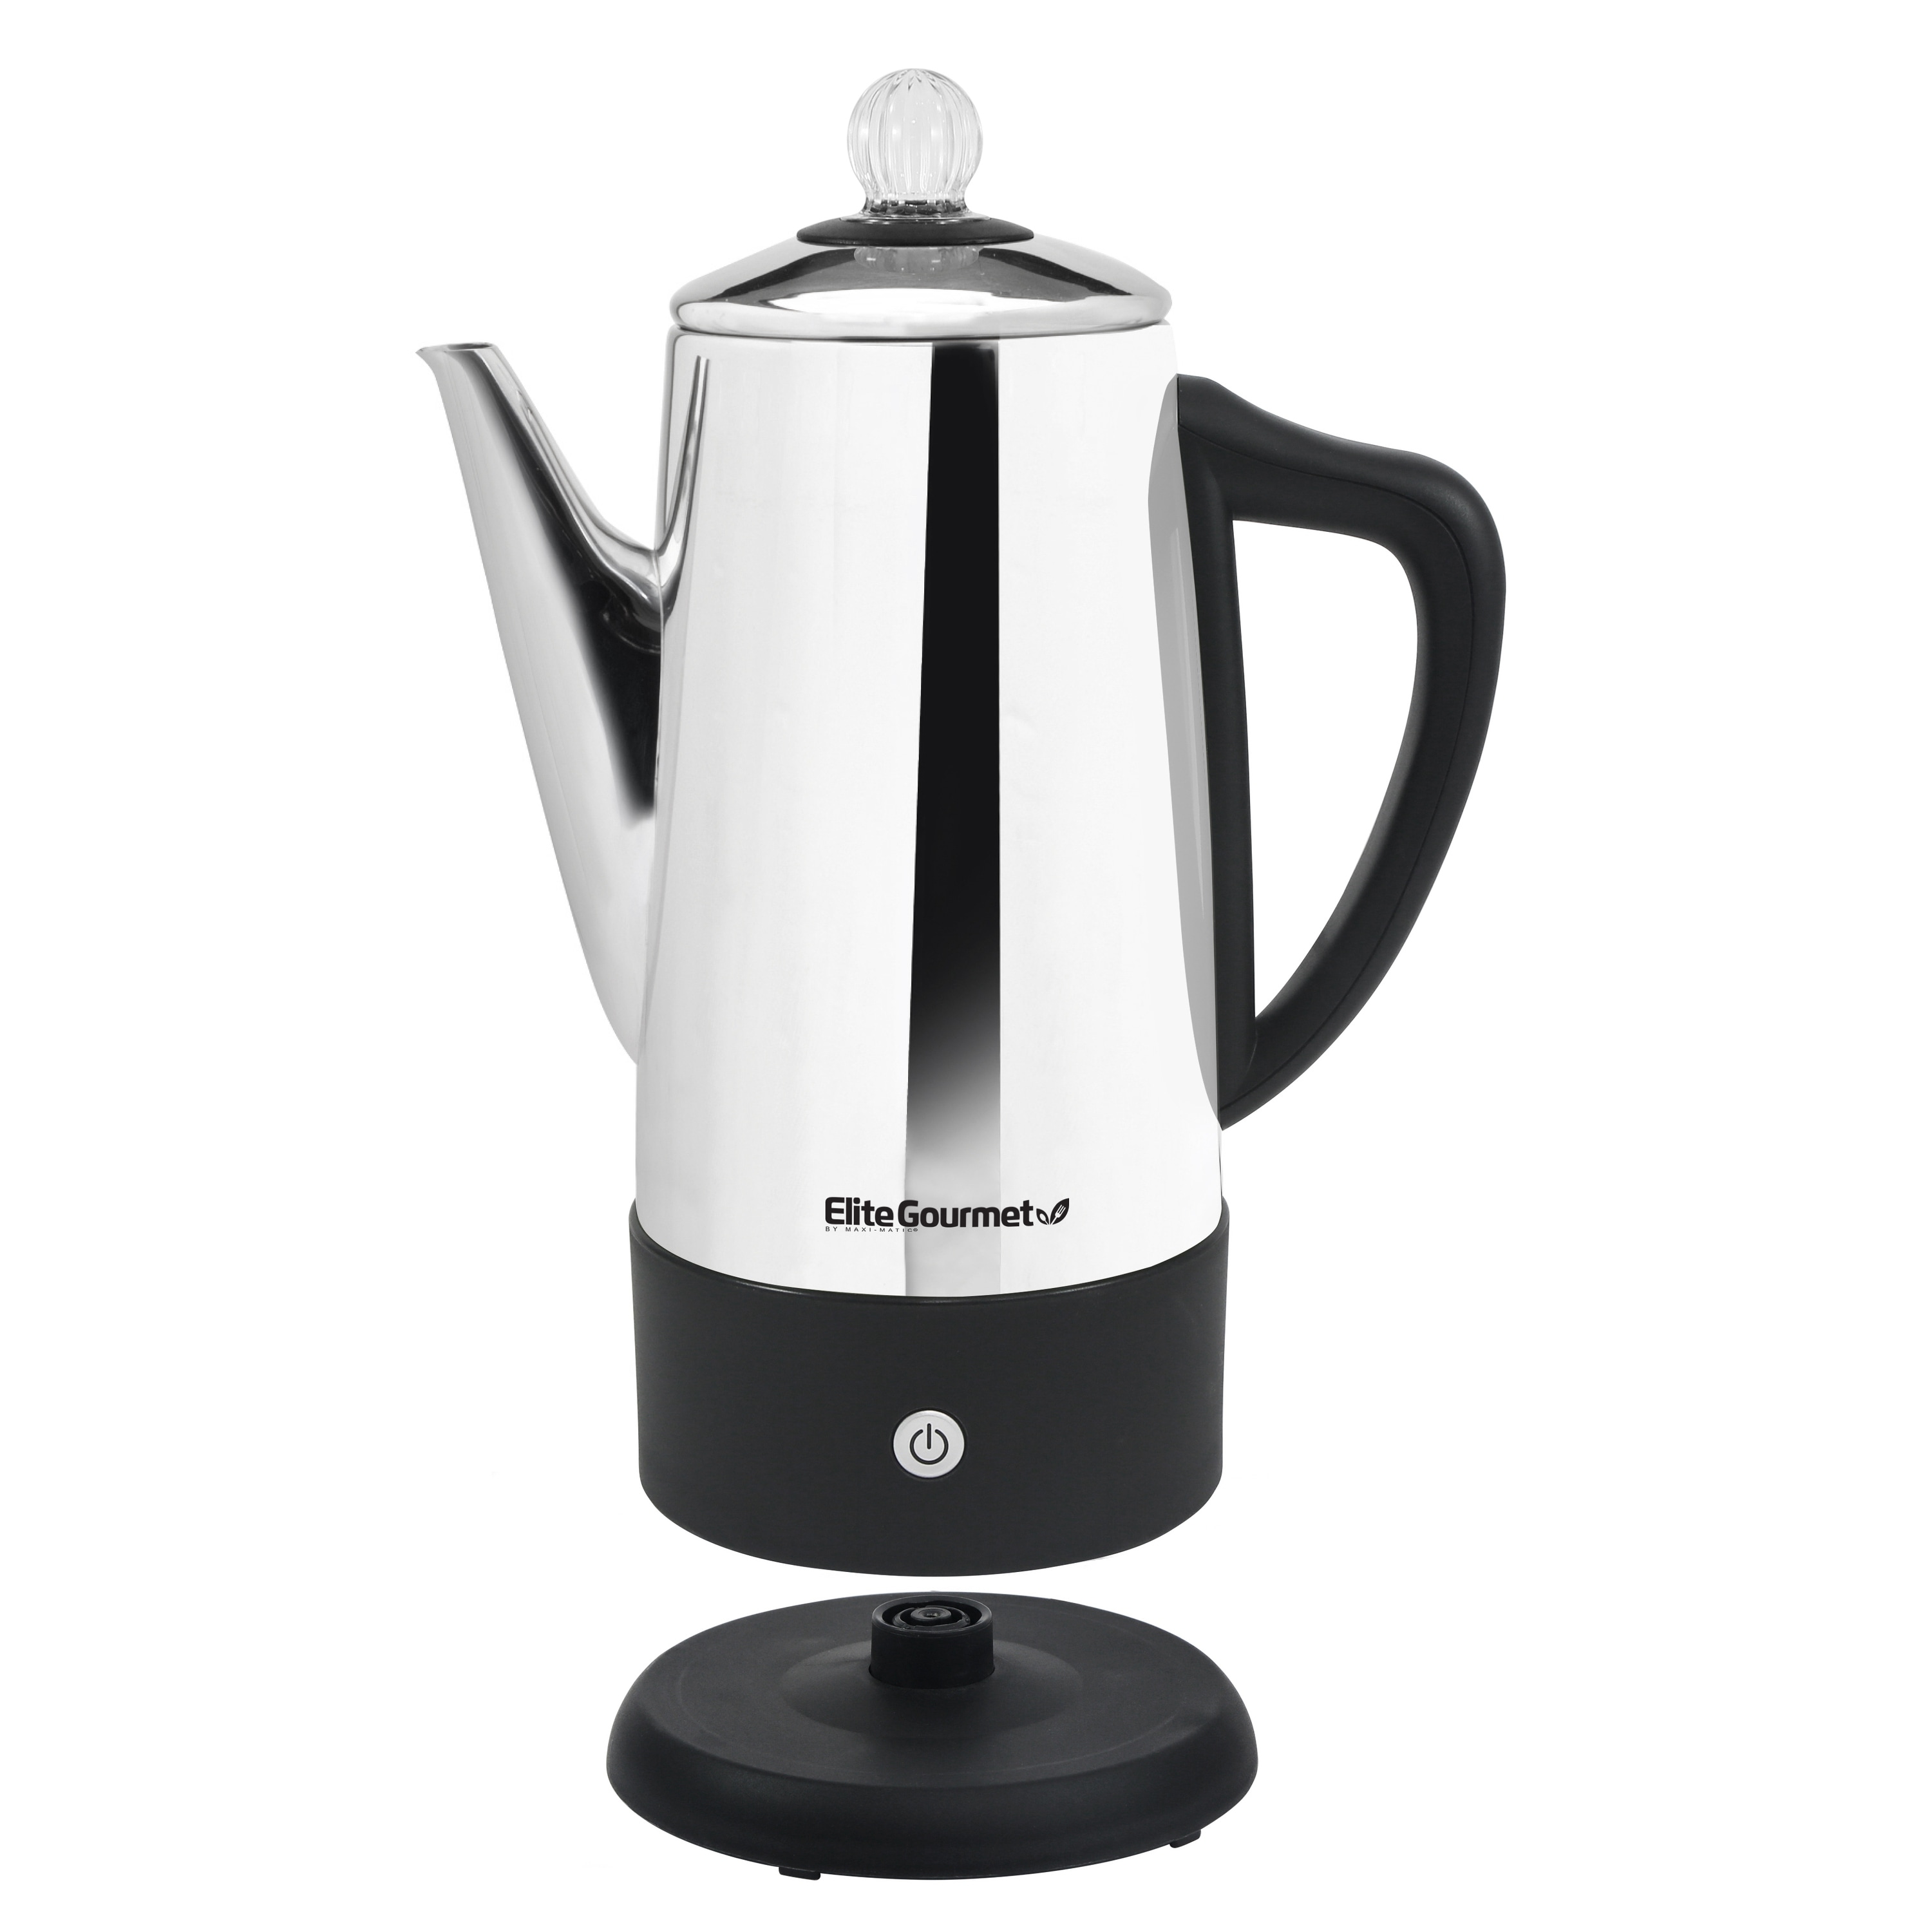 Stainless Steel 12 Cup Percolator EC-120